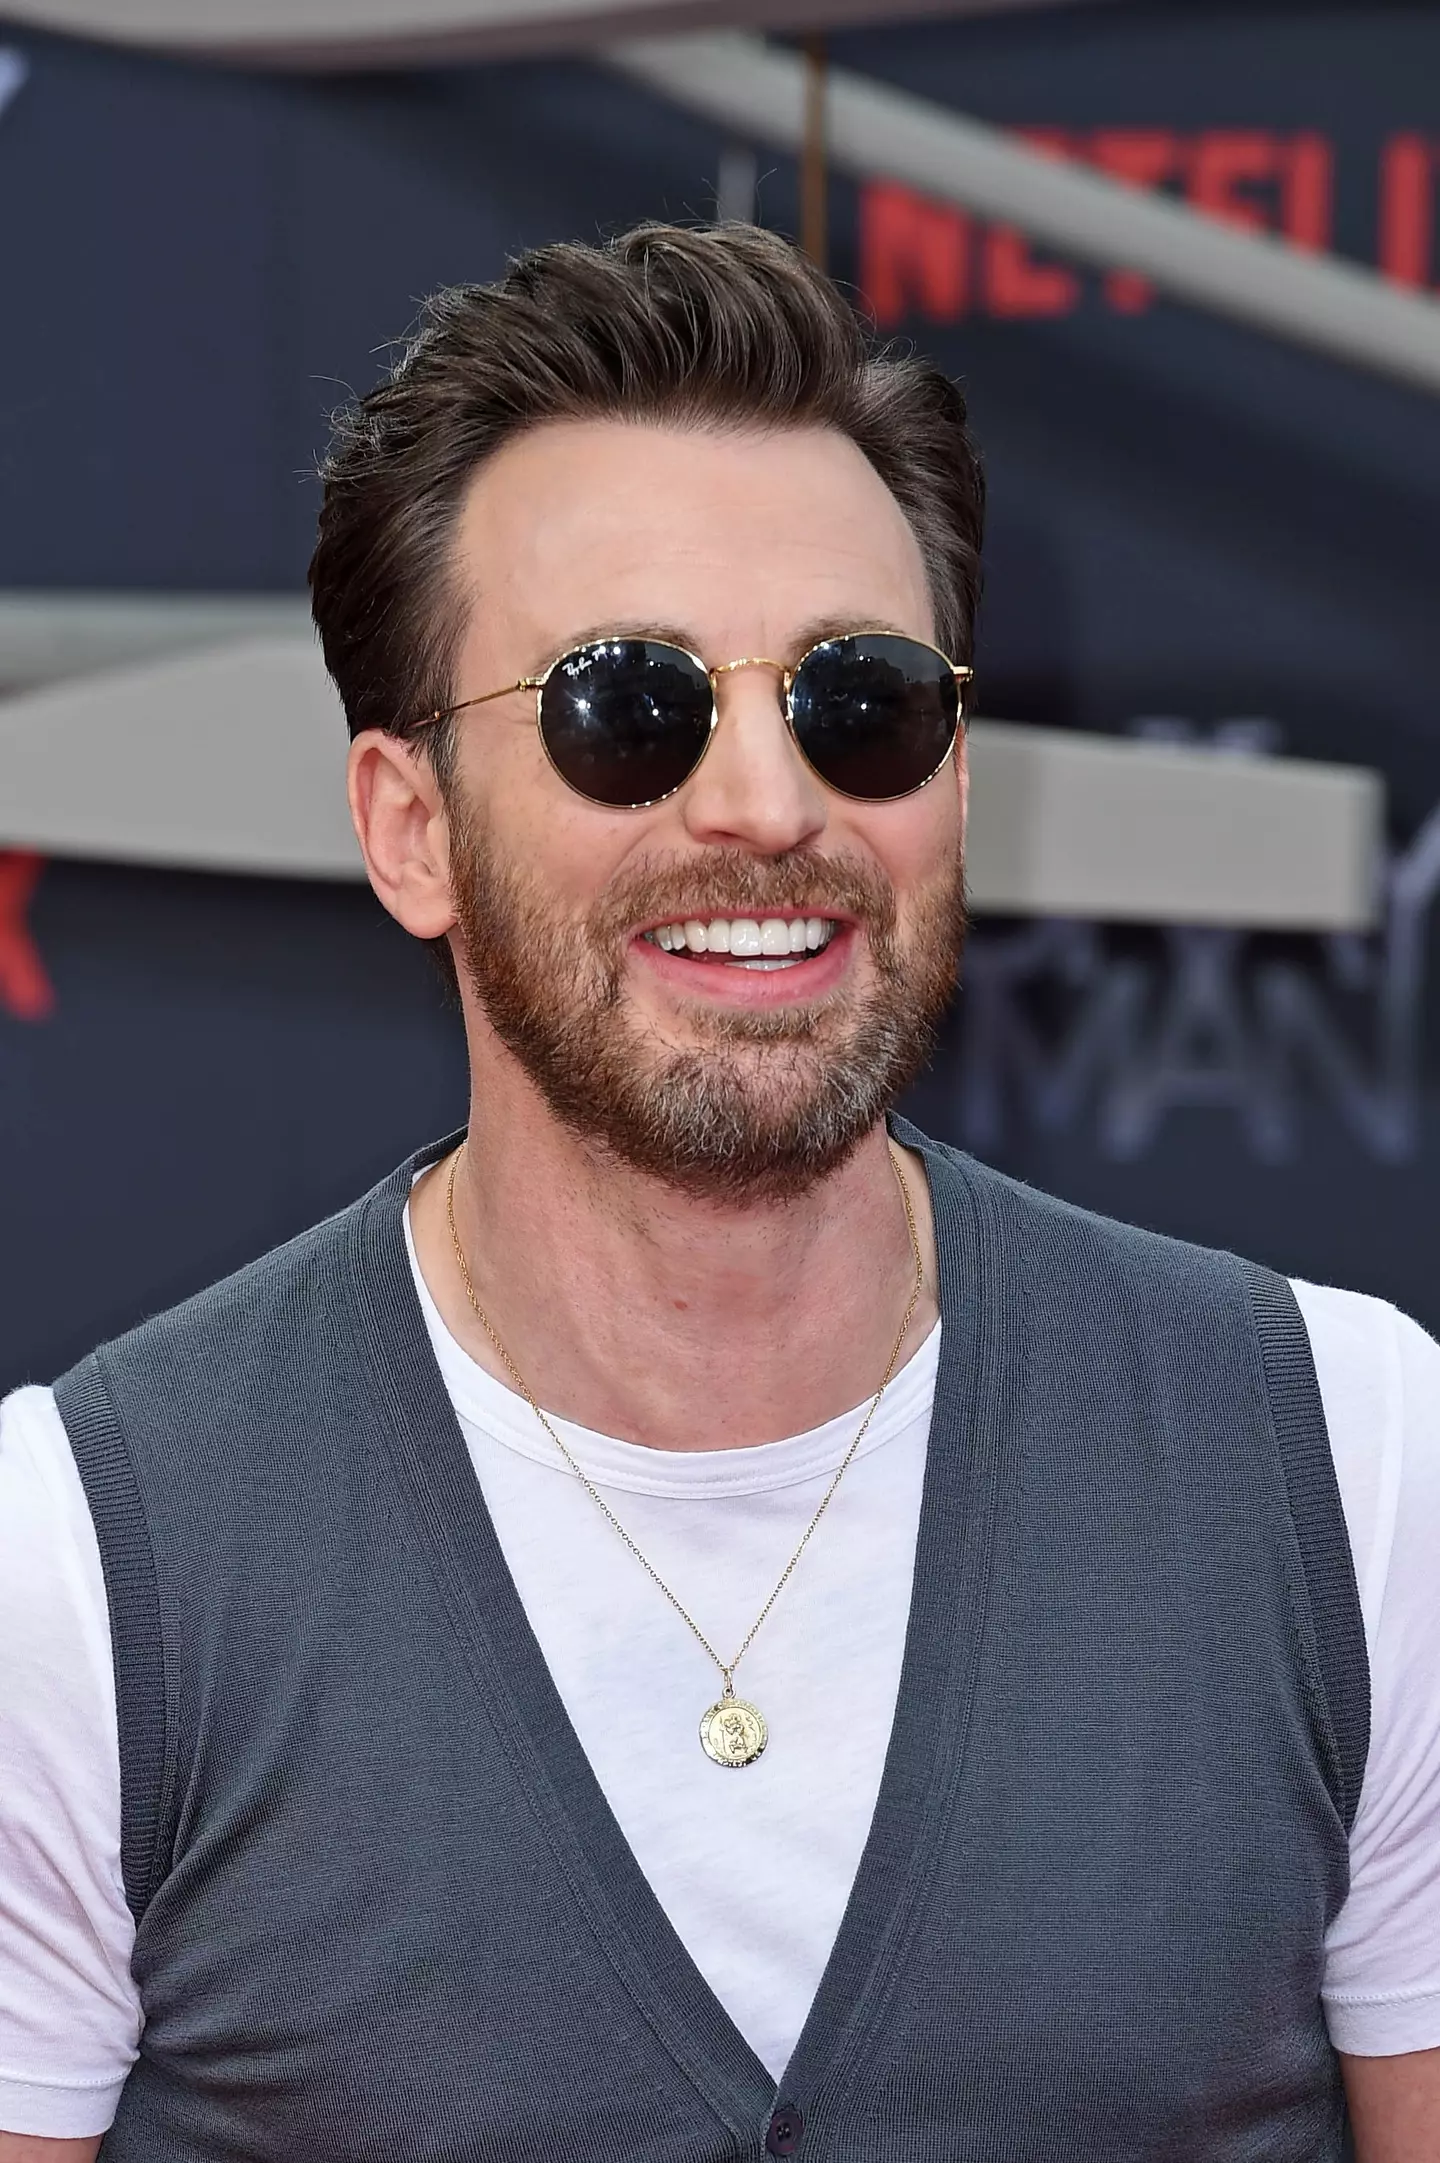 Chris Evans has historically been secretive about his personal life.